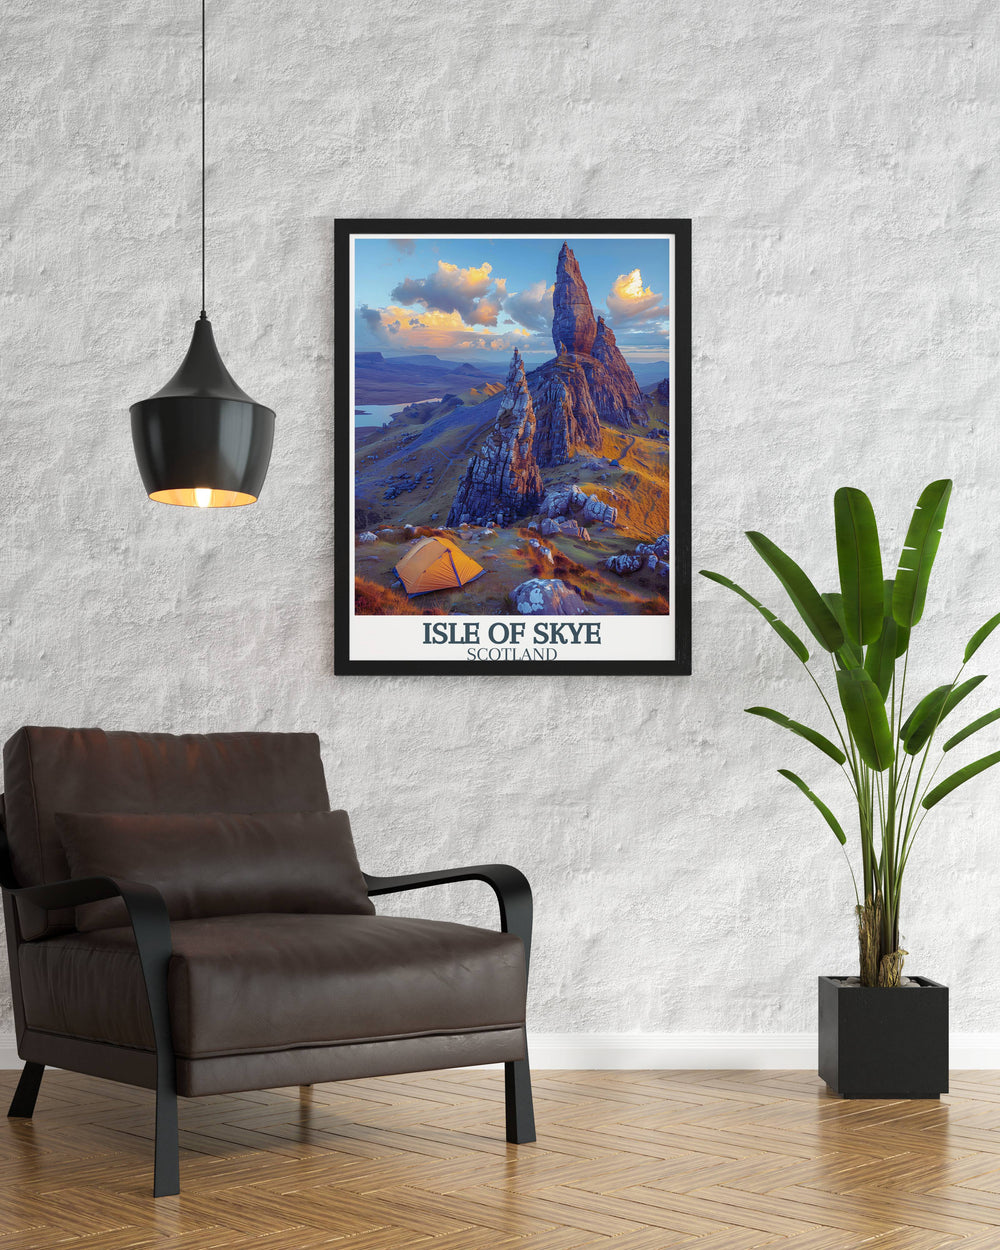 Scotland Travel Gift featuring a detailed print of the Old Man of Storr, a thoughtful and inspiring gift for any occasion